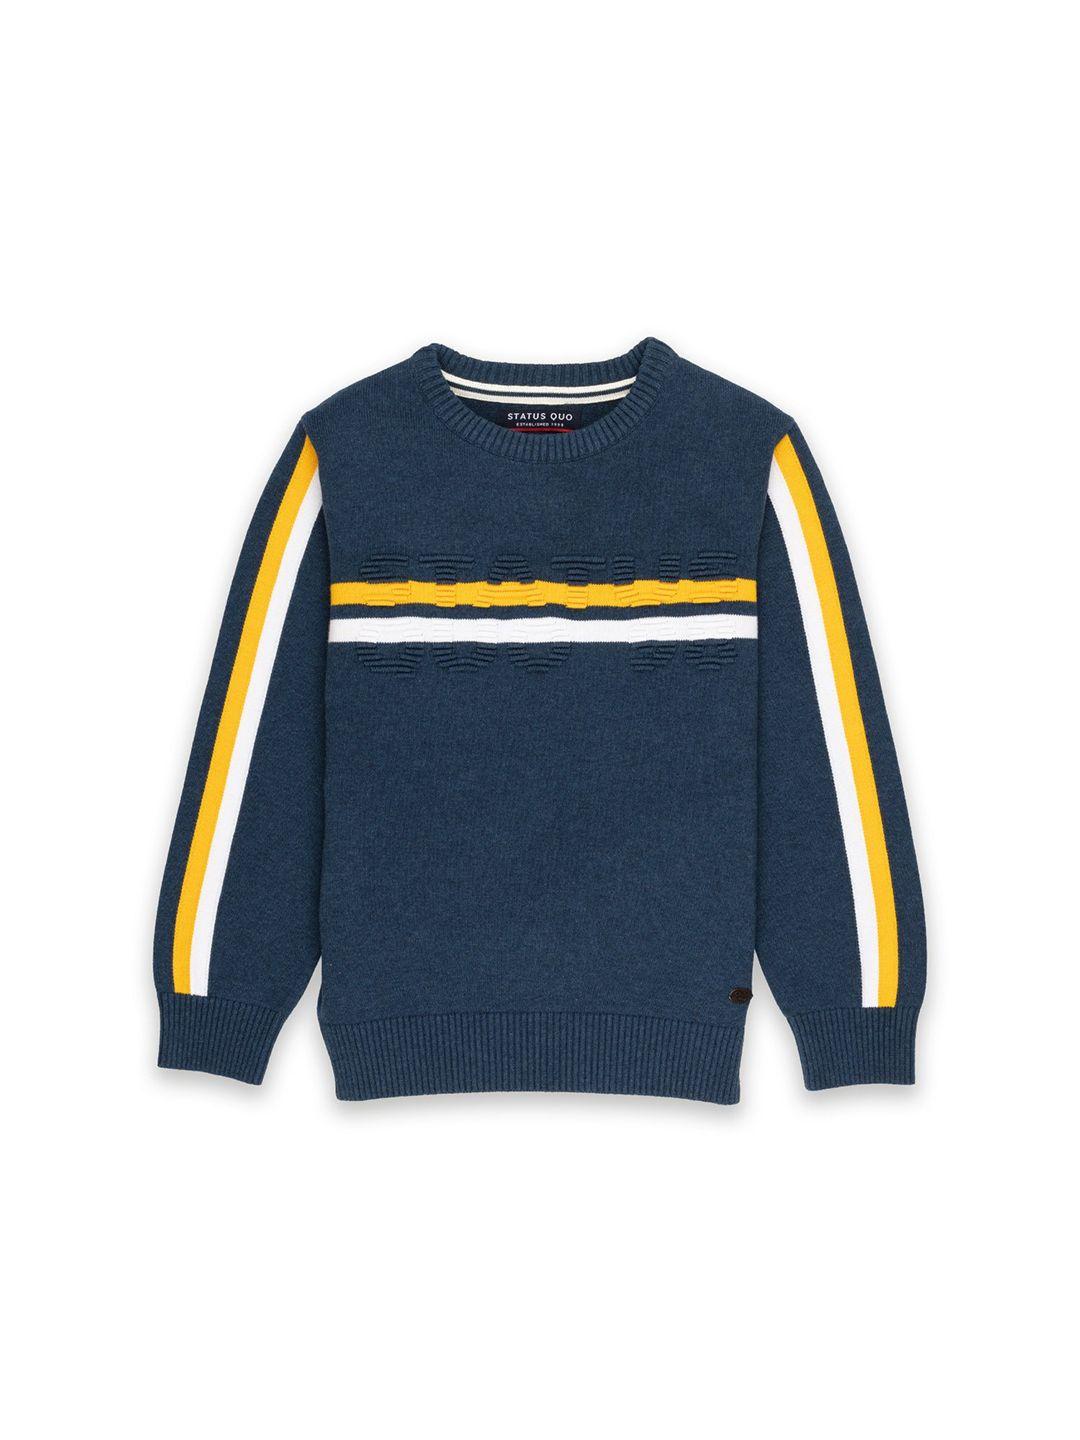 status-quo-boys-blue-&-yellow-striped-pullover